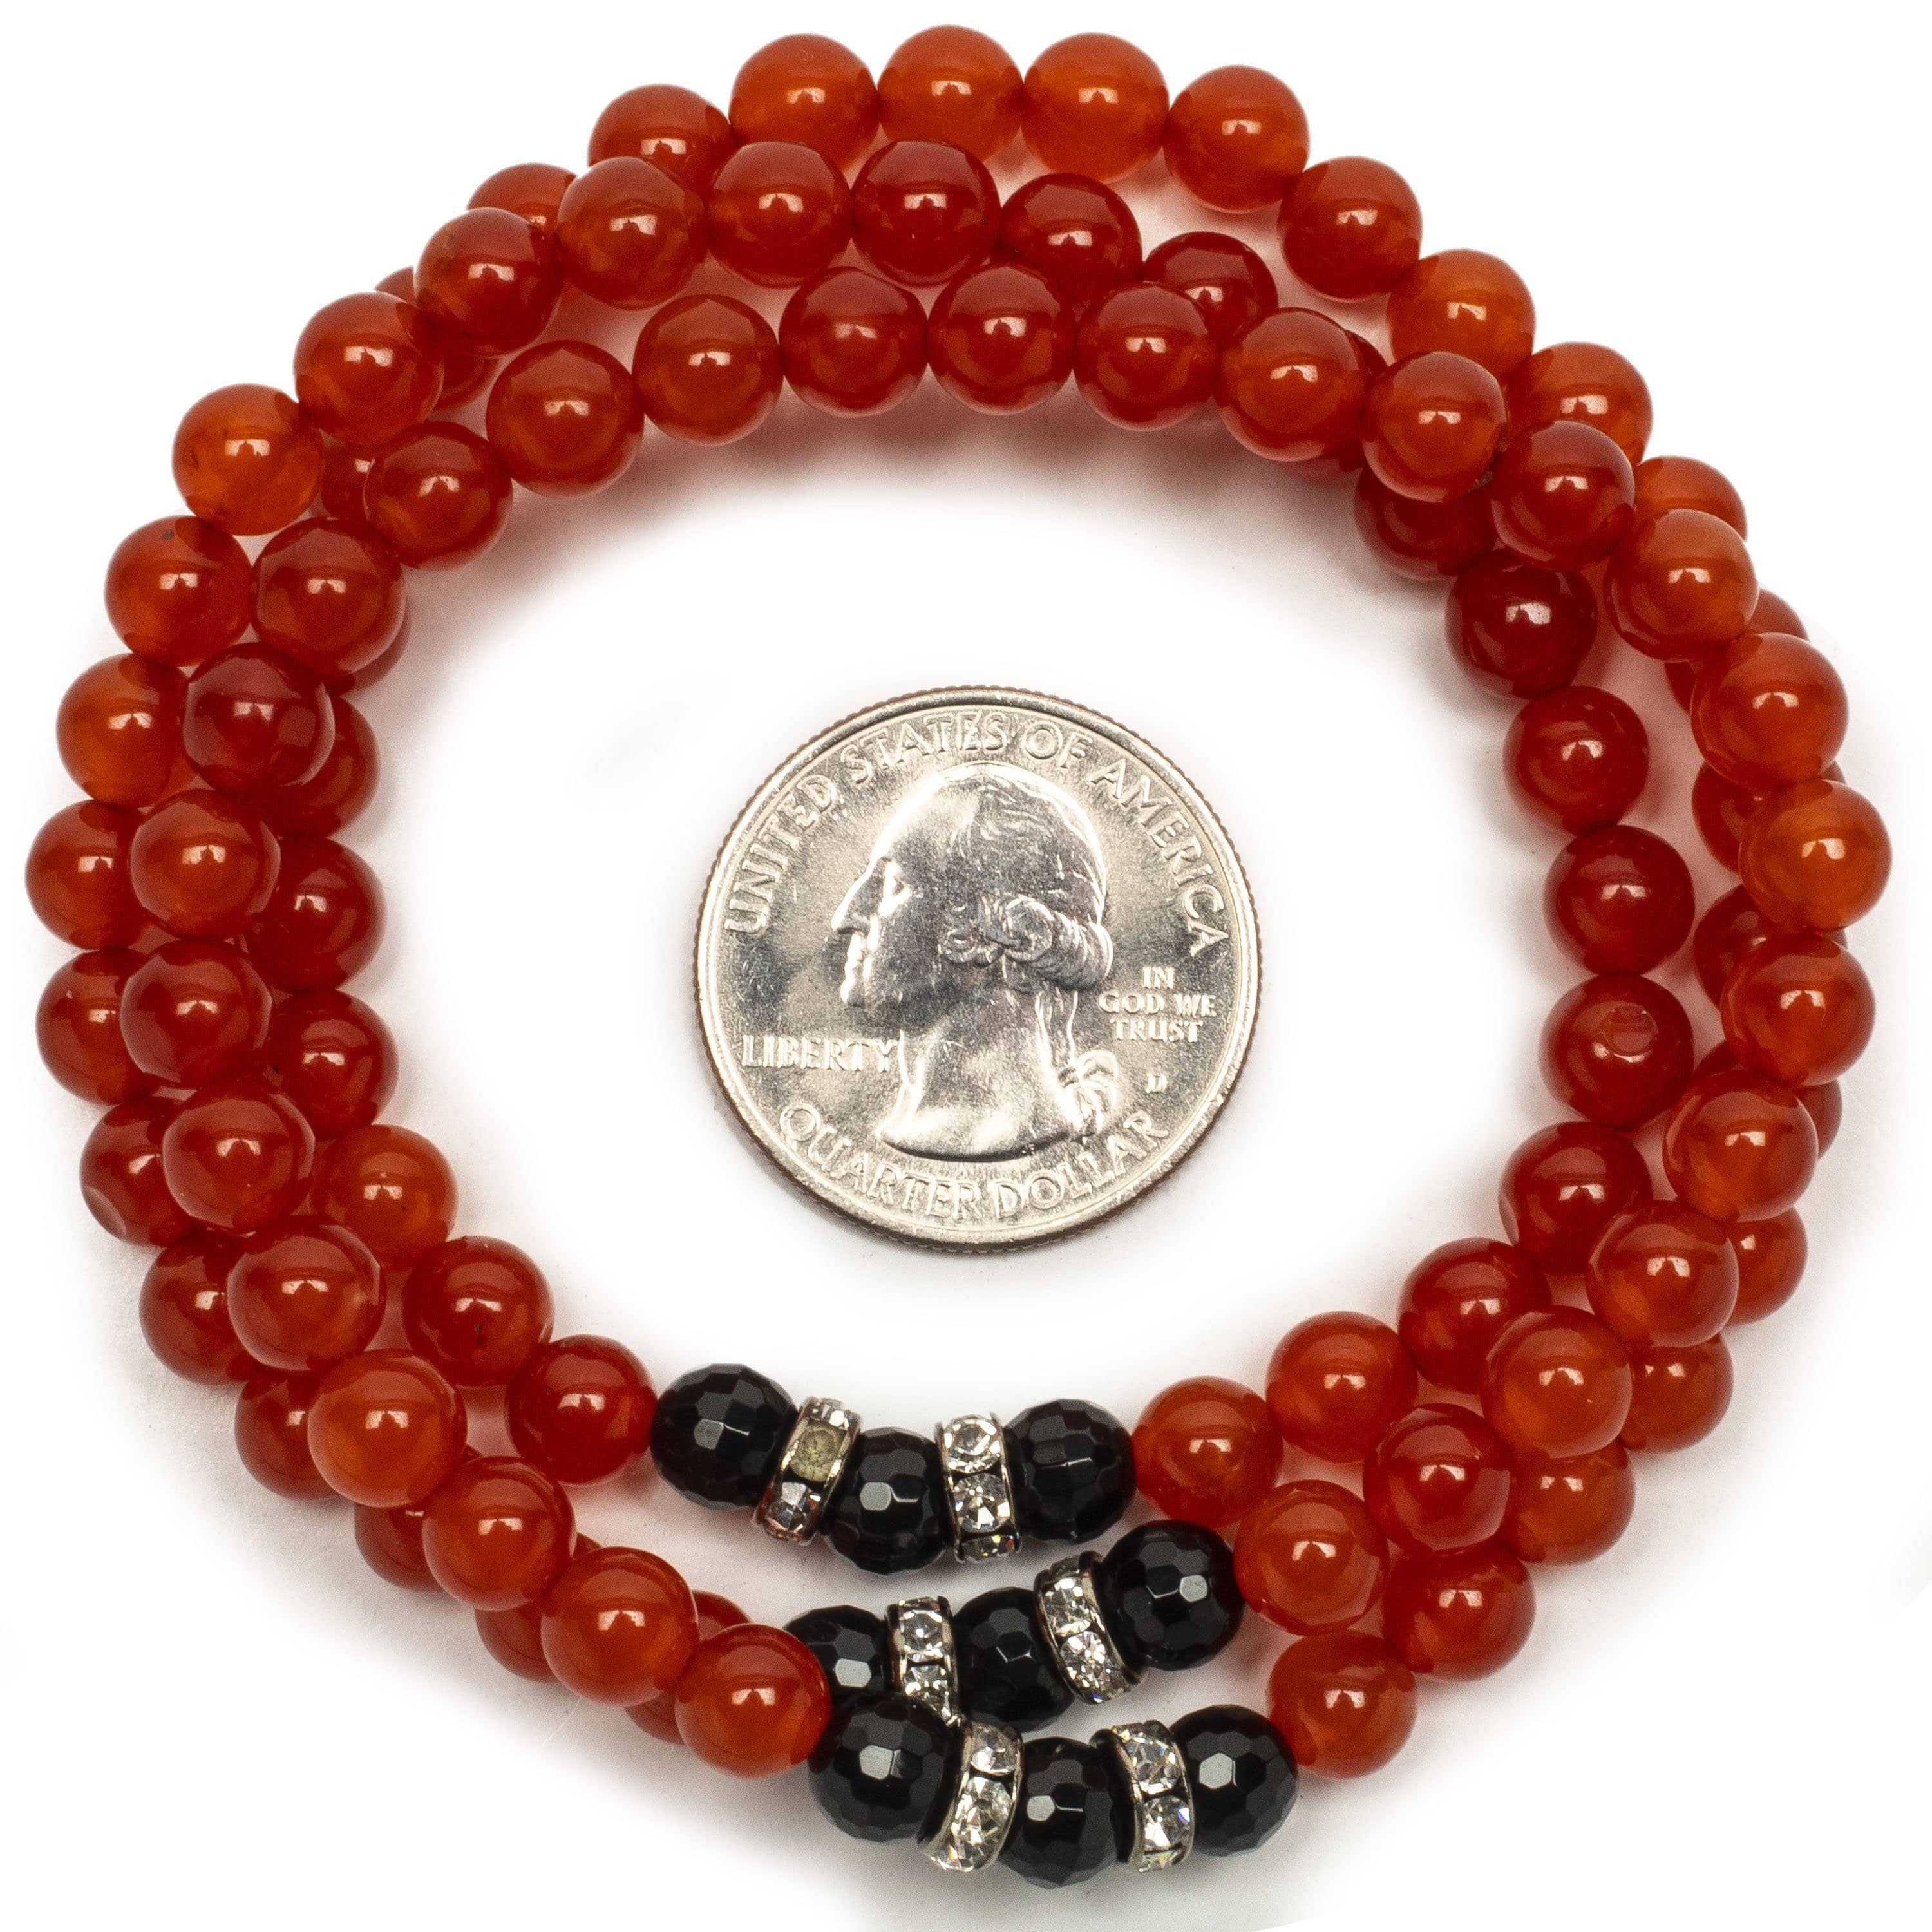 Kalifano Gemstone Bracelets Red Agate 6mm Beads with Black Agate and Silver Crystal Accent Beads Triple Wrap Elastic Gemstone Bracelet WHITE-BGI3-061